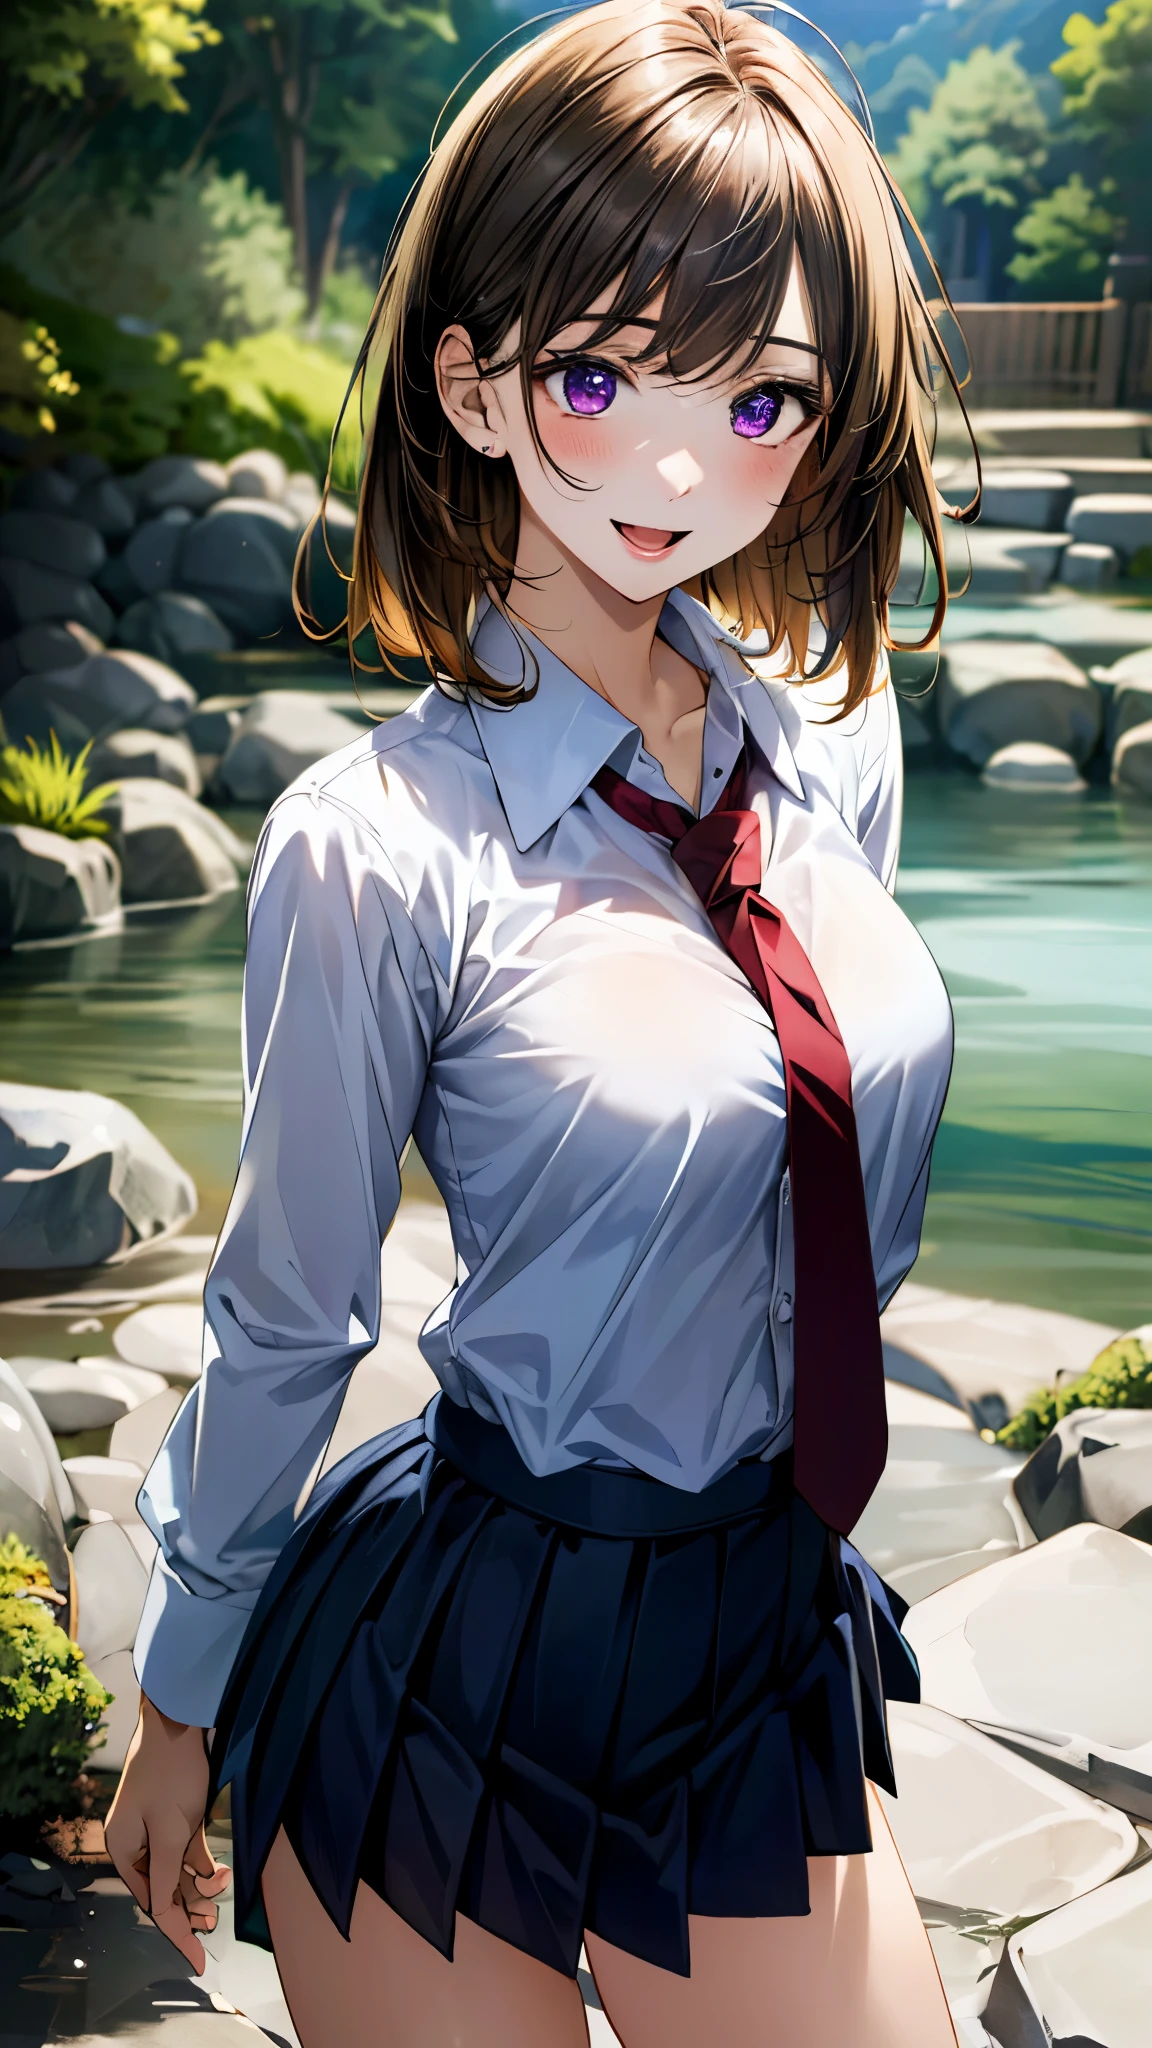 (masterpiece:1.3, top-quality, ultra high res, ultra detailed), (realistic, photorealistic:1.4), beautiful illustration, perfect lighting, natural lighting, colorful, depth of fields, 
beautiful detailed hair, beautiful detailed face, beautiful detailed eyes, beautiful clavicle, beautiful body, beautiful chest, beautiful thigh, beautiful legs, beautiful fingers, 
looking at viewer, 1 girl, japanese, high school girl, perfect face, (perfect anatomy, anatomically correct), cute and symmetrical face, babyface, , shiny skin, 
(middle hair:1.5, straight hair:1.4, blonde hair), swept bangs, dark purple eyes, long eye lasher, (medium breasts), slender, 
((collared white shirt, navy pleated skirt, dark red tie)), navy school socks, , 
(beautiful scenery), evening, (hot spring town), standing, hands on chest, (seductive smile, open mouth), 